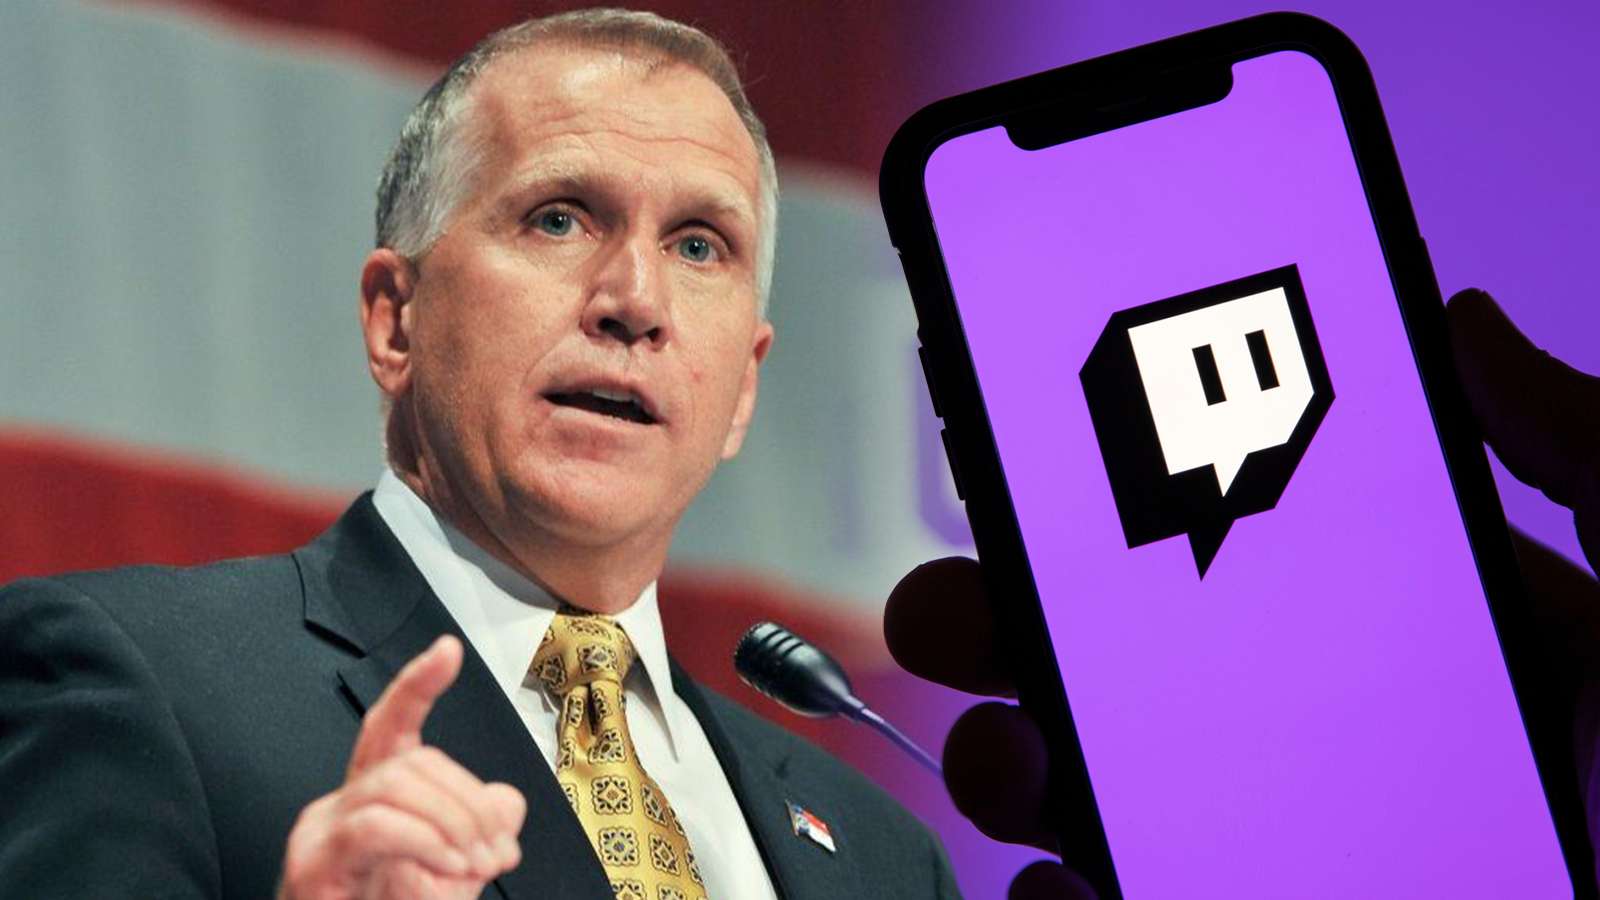 Senator Thom Tillis stands next to a phone with the Twitch logo on it.